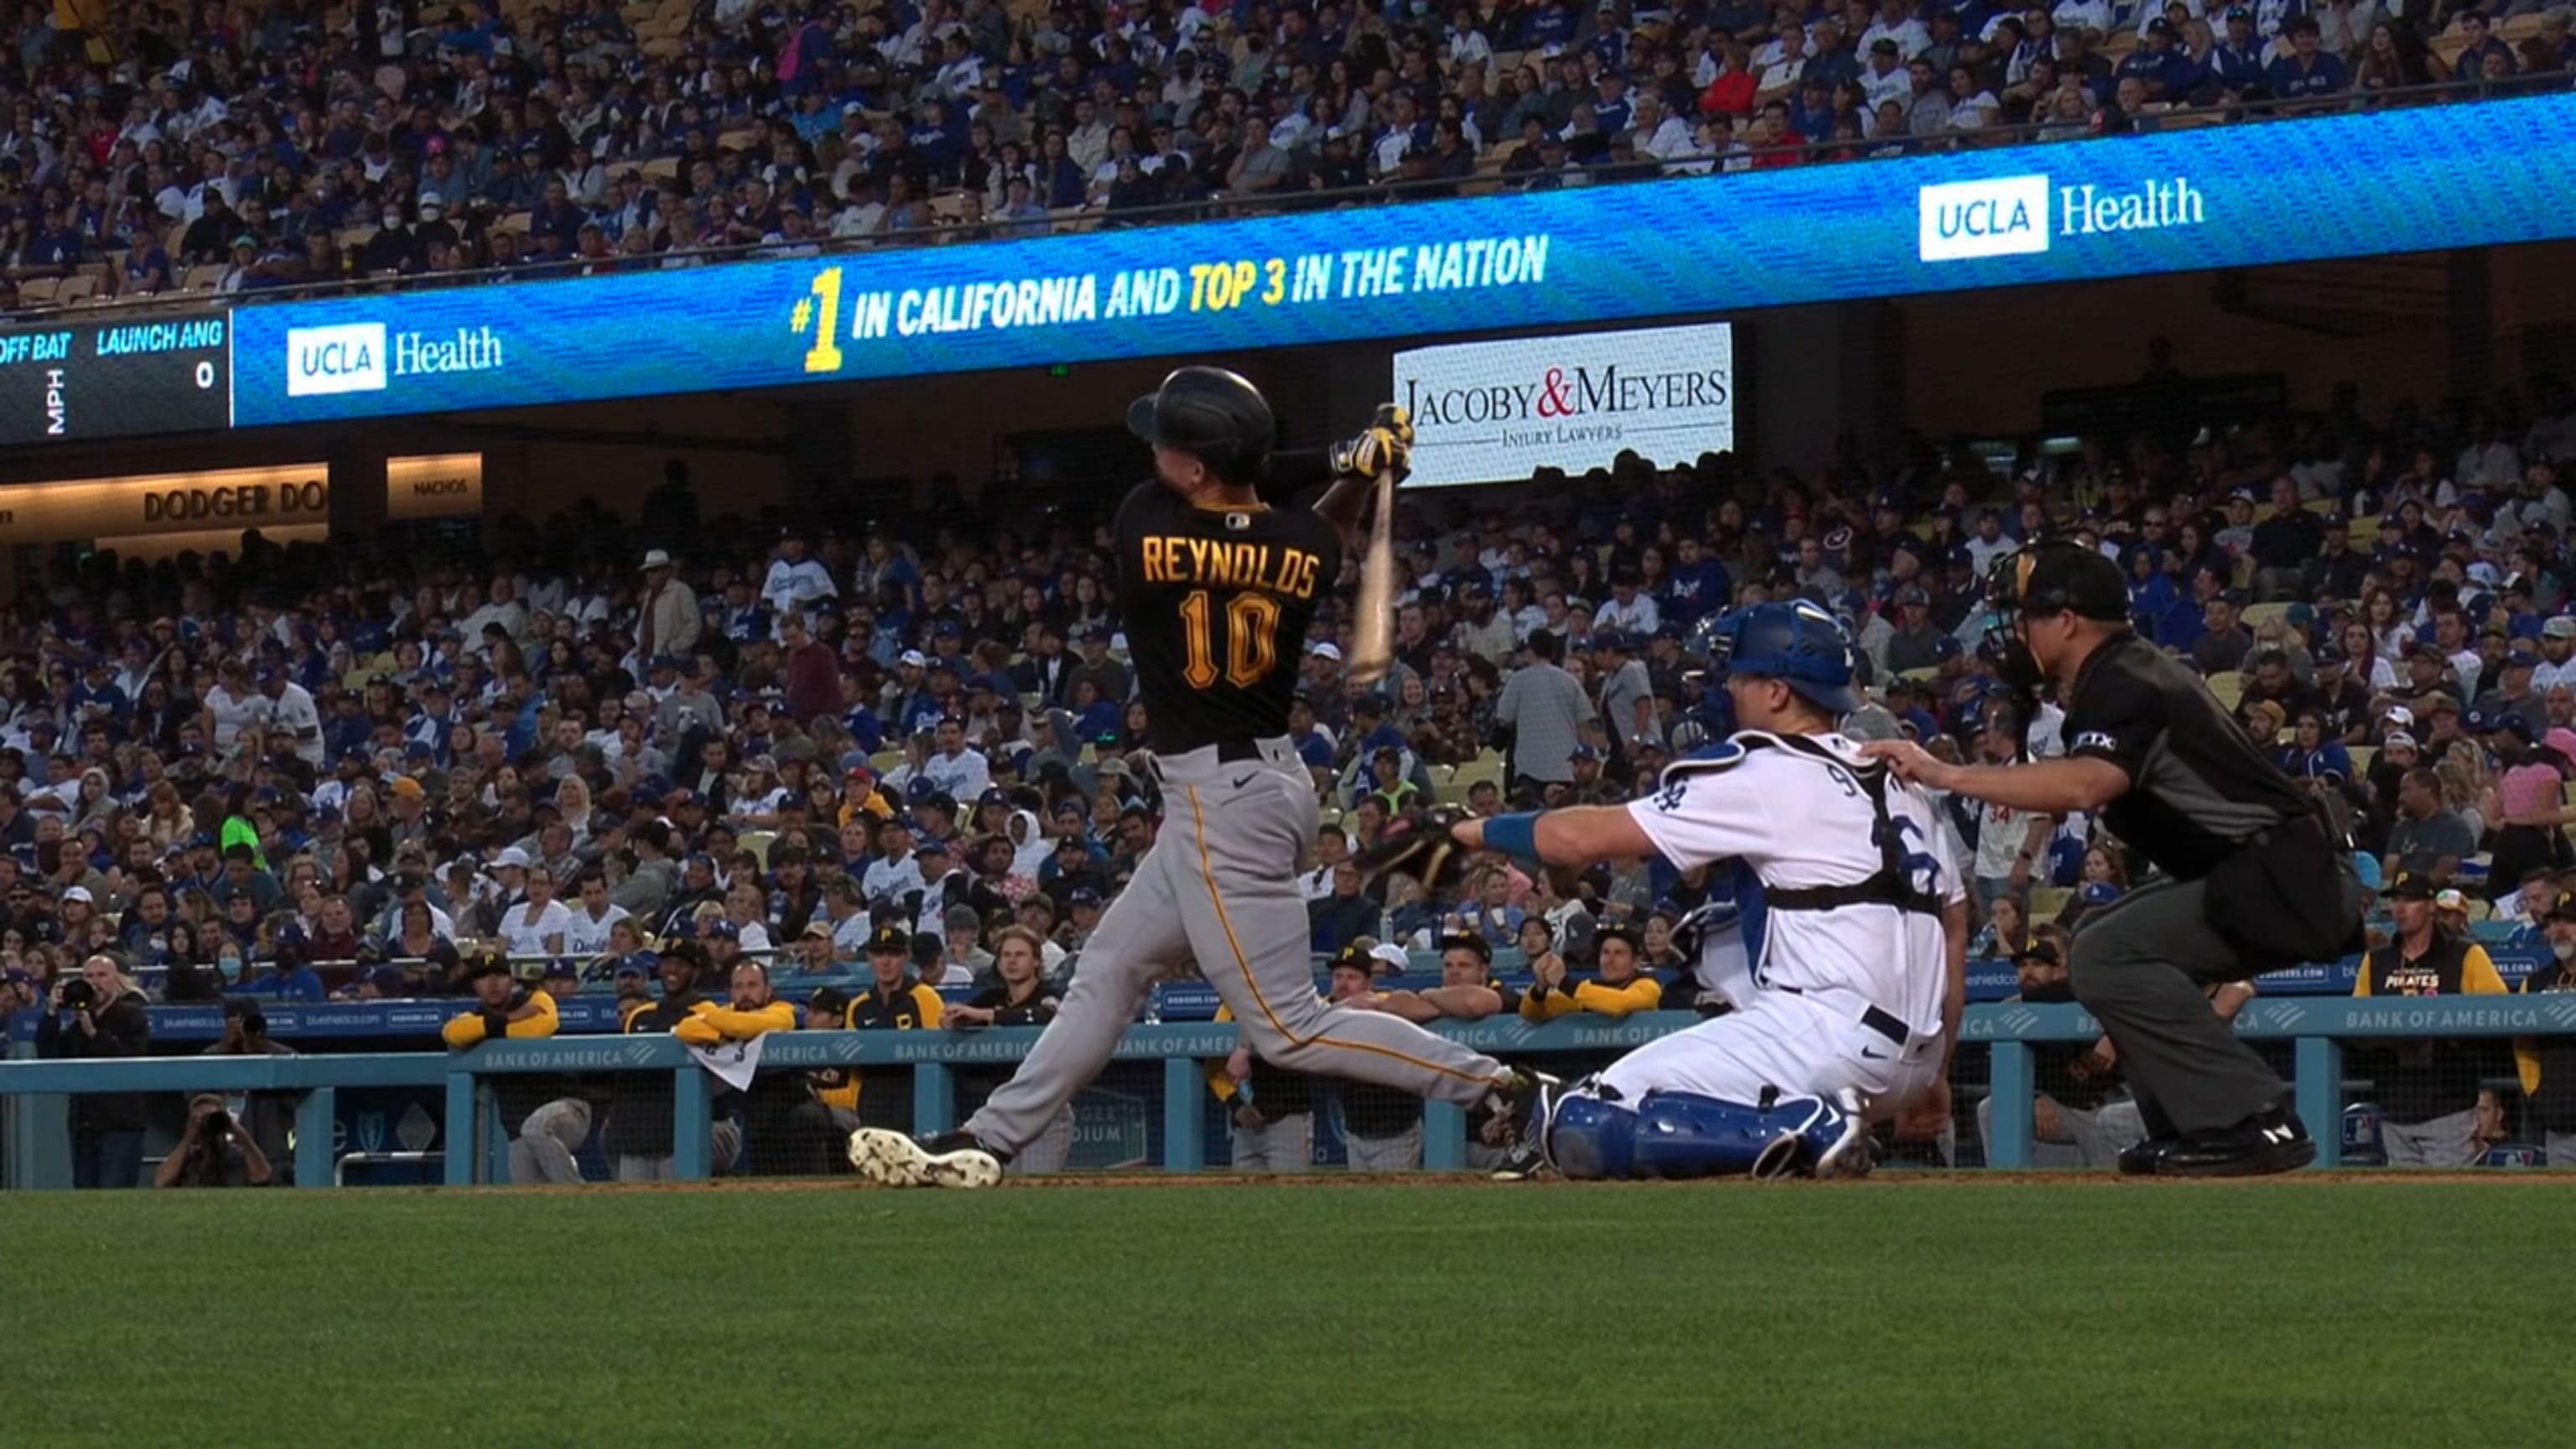 He's a beast:' David Bednar succeeds in chance at redemption, Pirates pull  off wild win over Dodgers